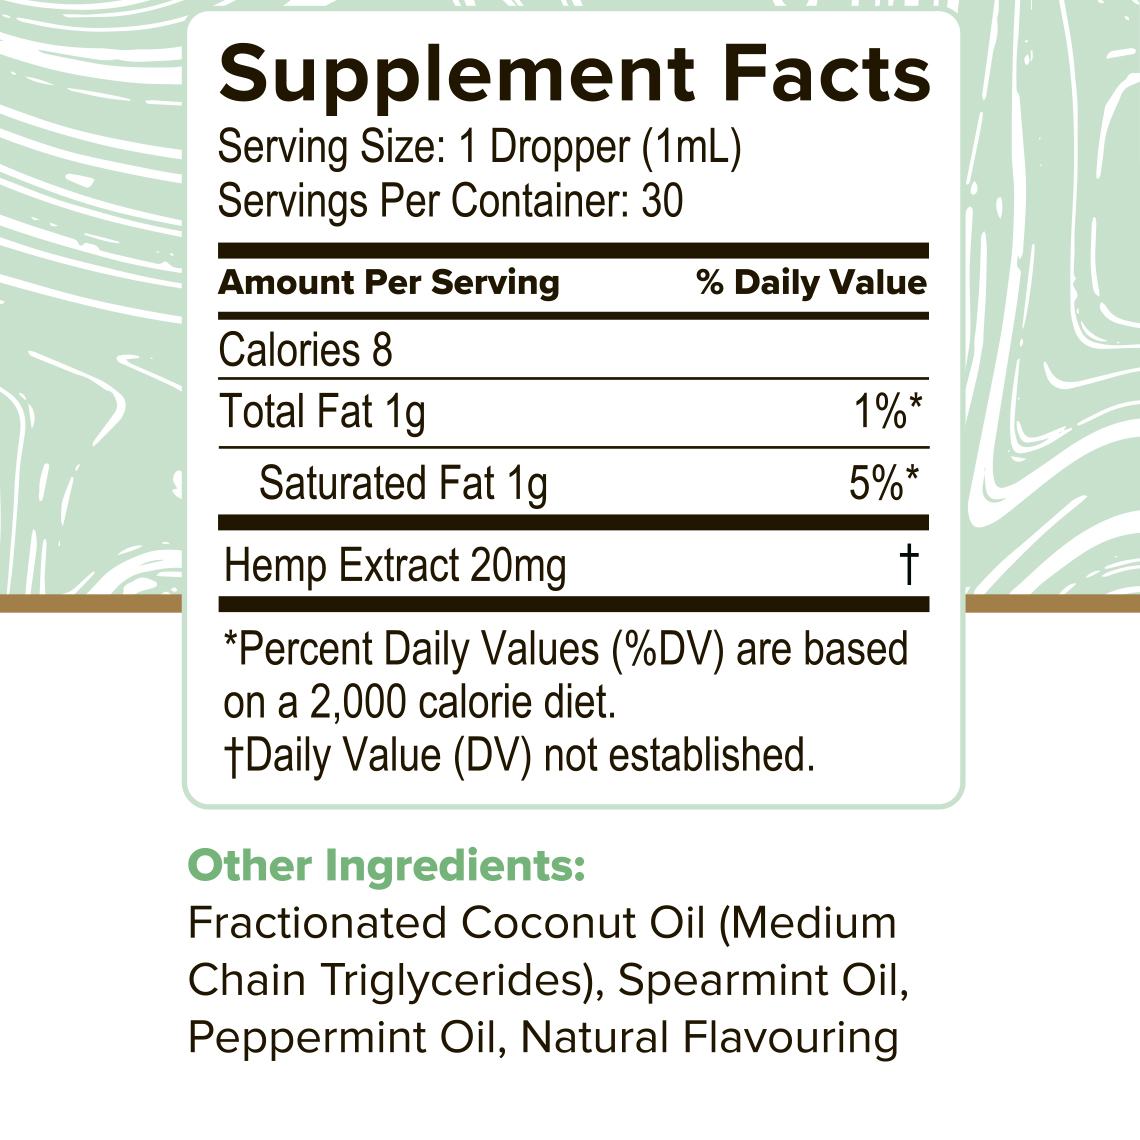 600mg-Mint-Hemp-Extract-label-2 - preview